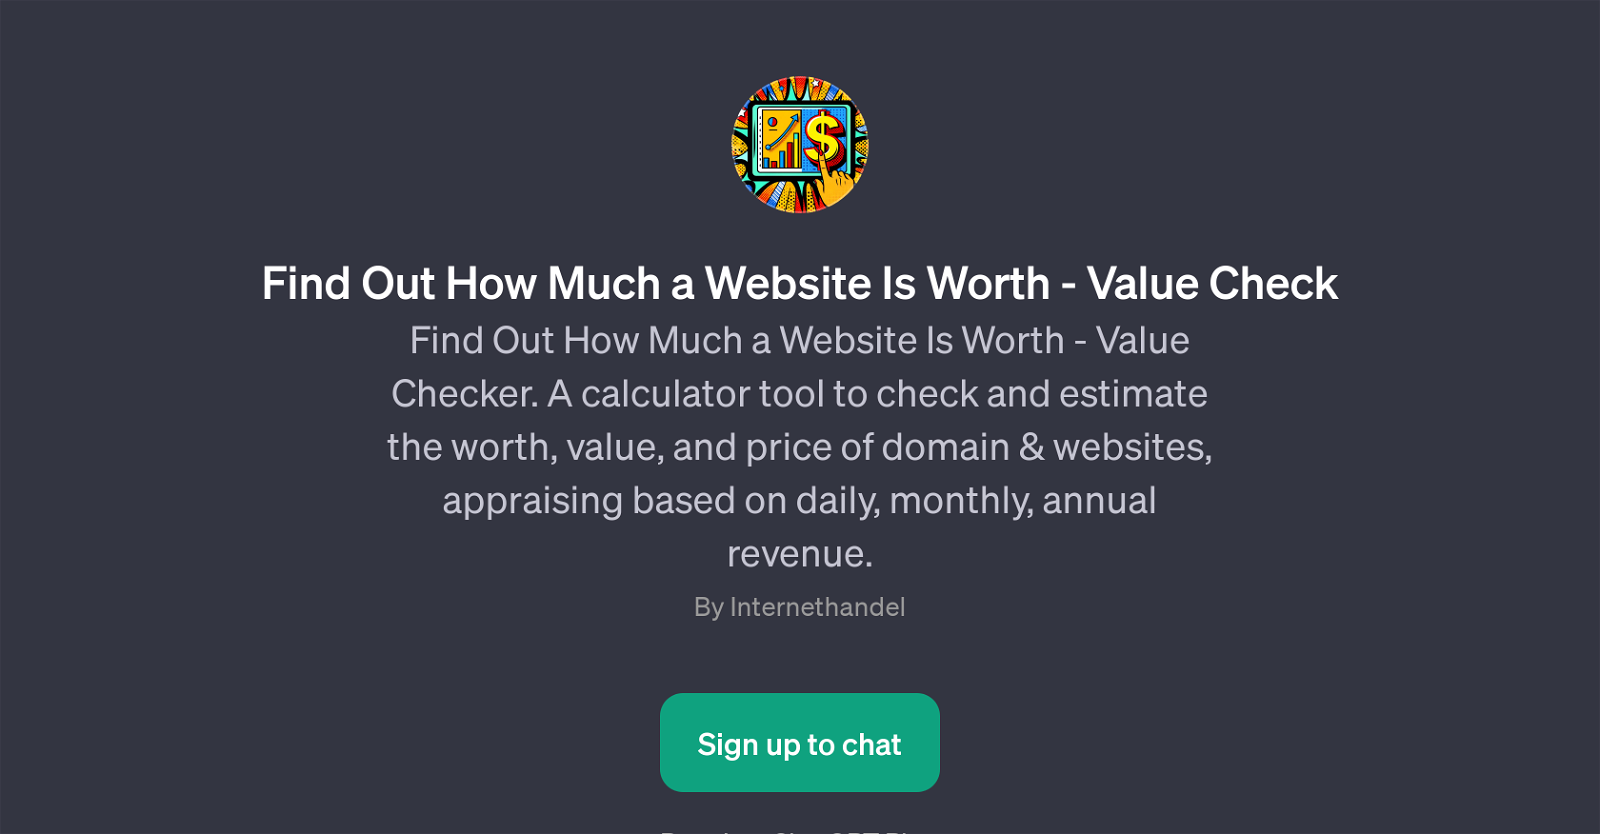 Find Out How Much a Website Is Worth - Value Check website